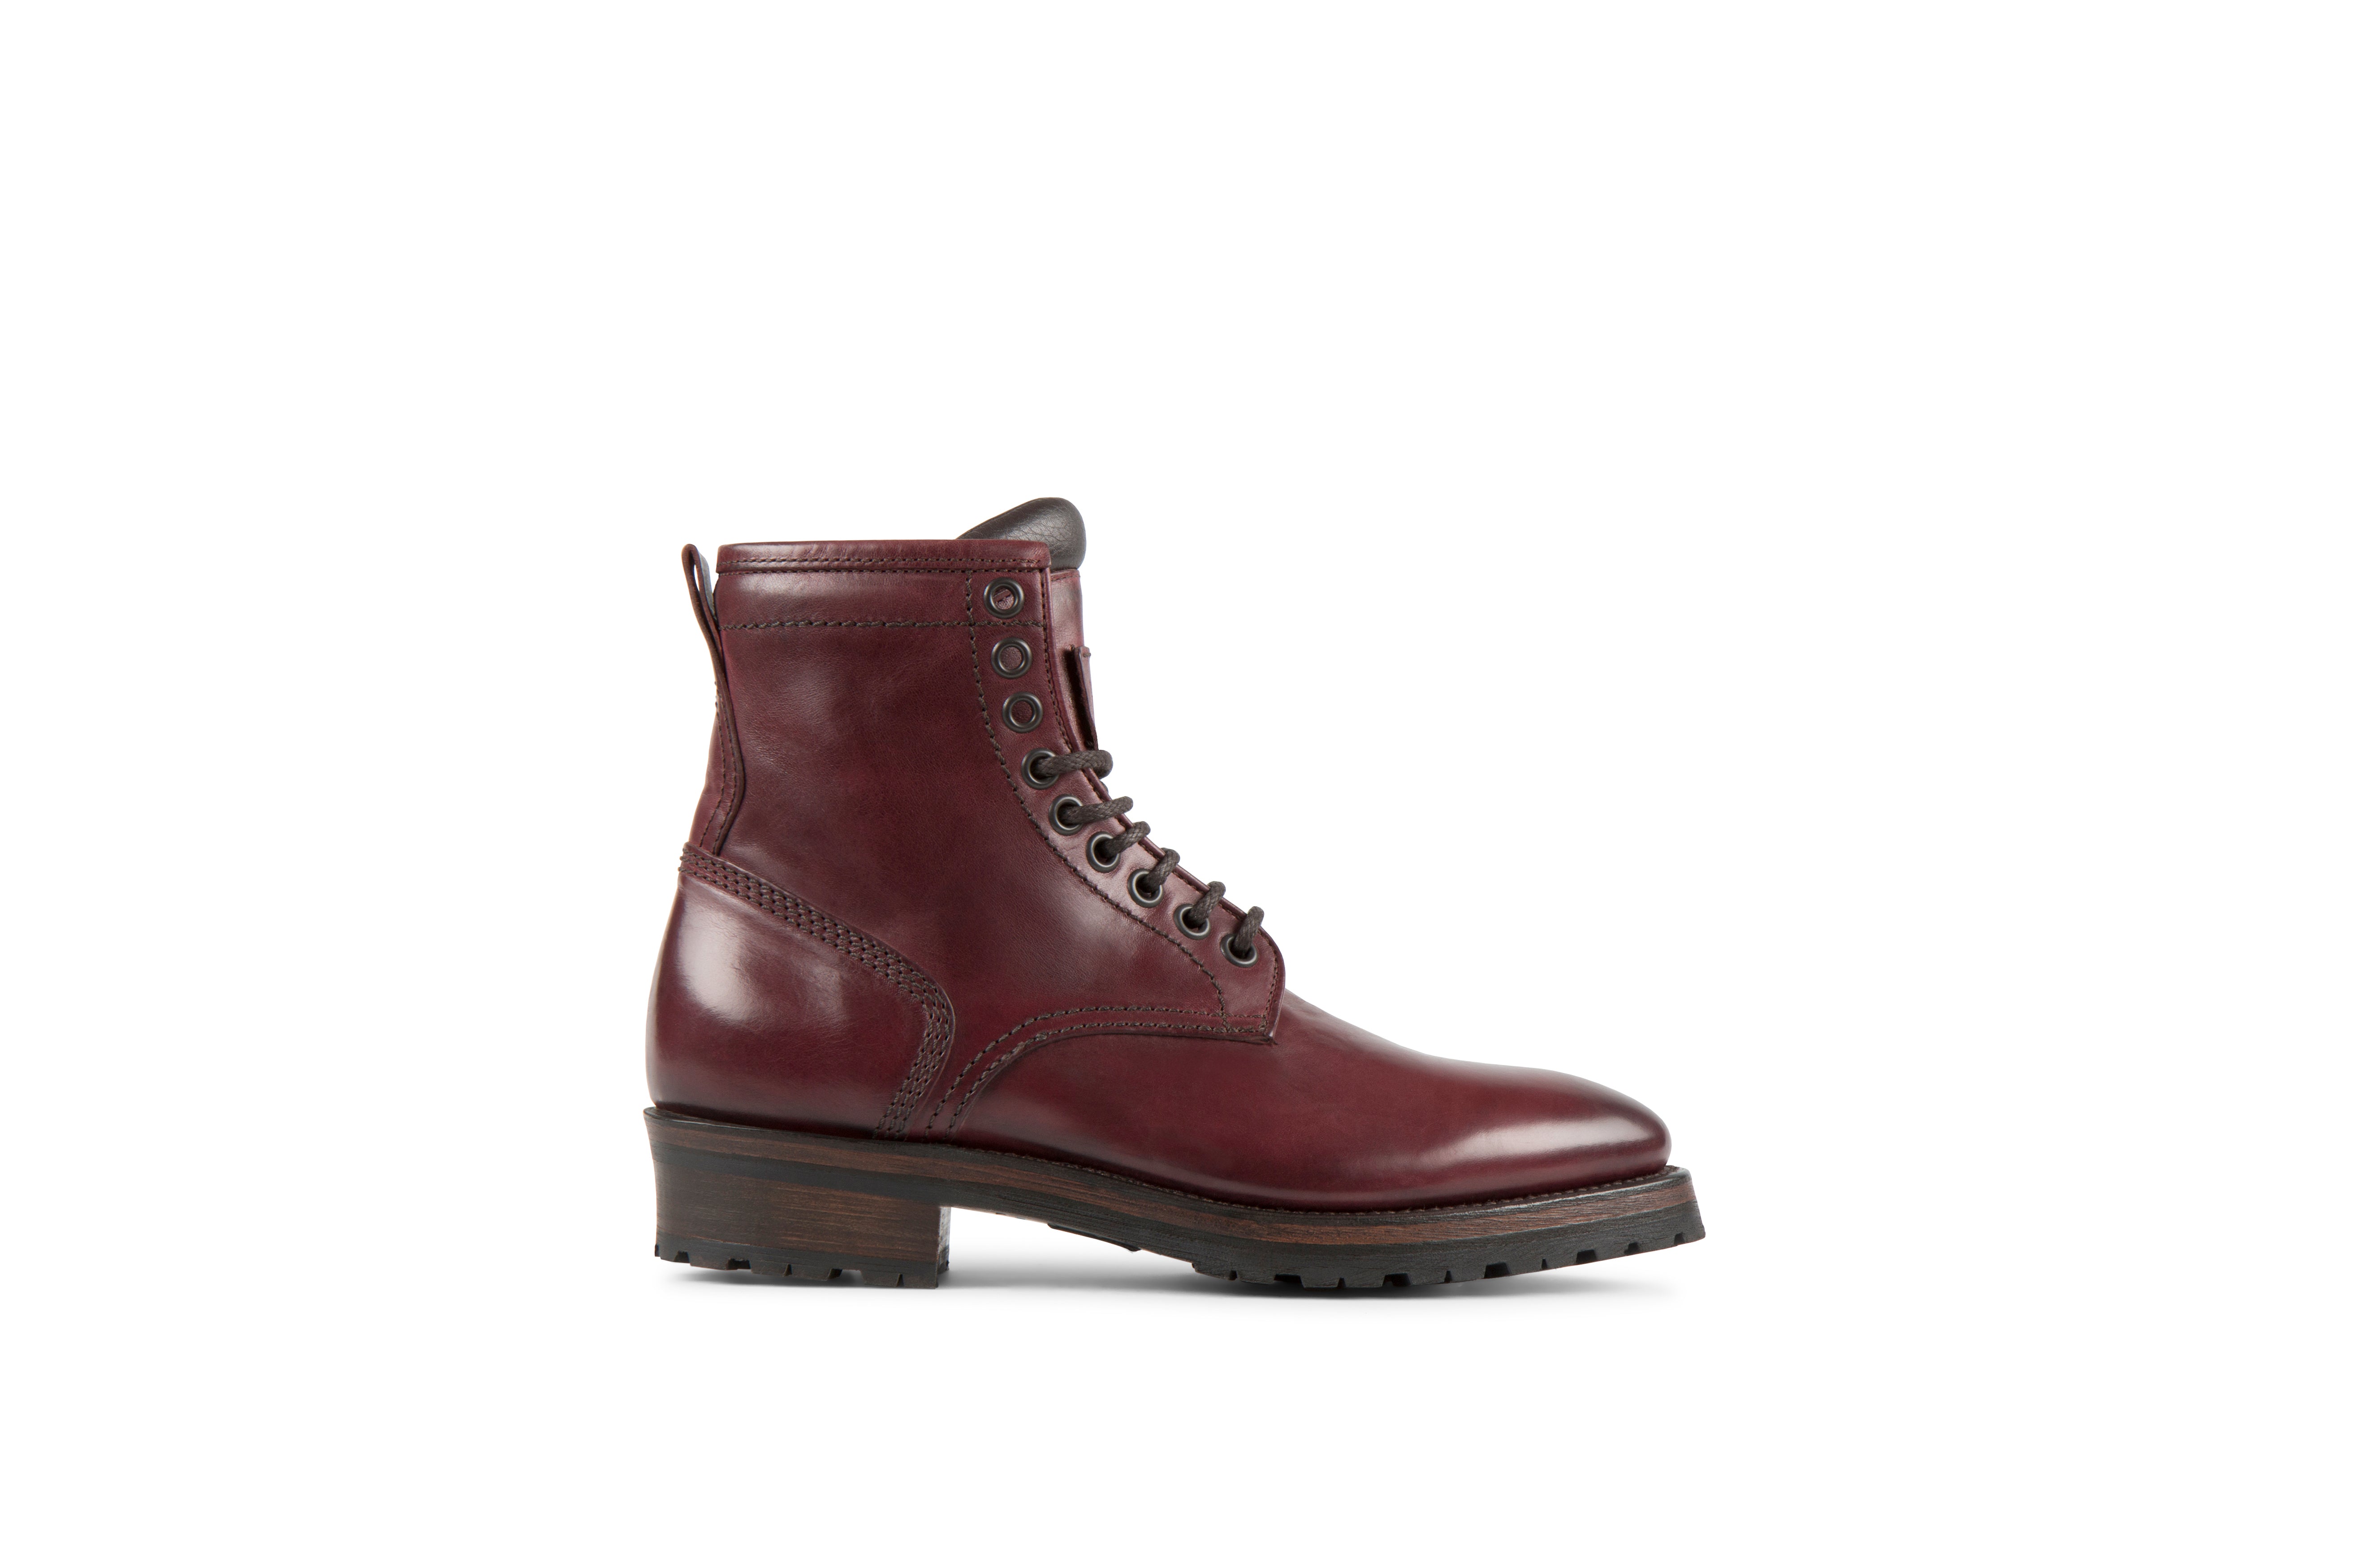 Royal Burgundy Cordovan Leather Logger Boots